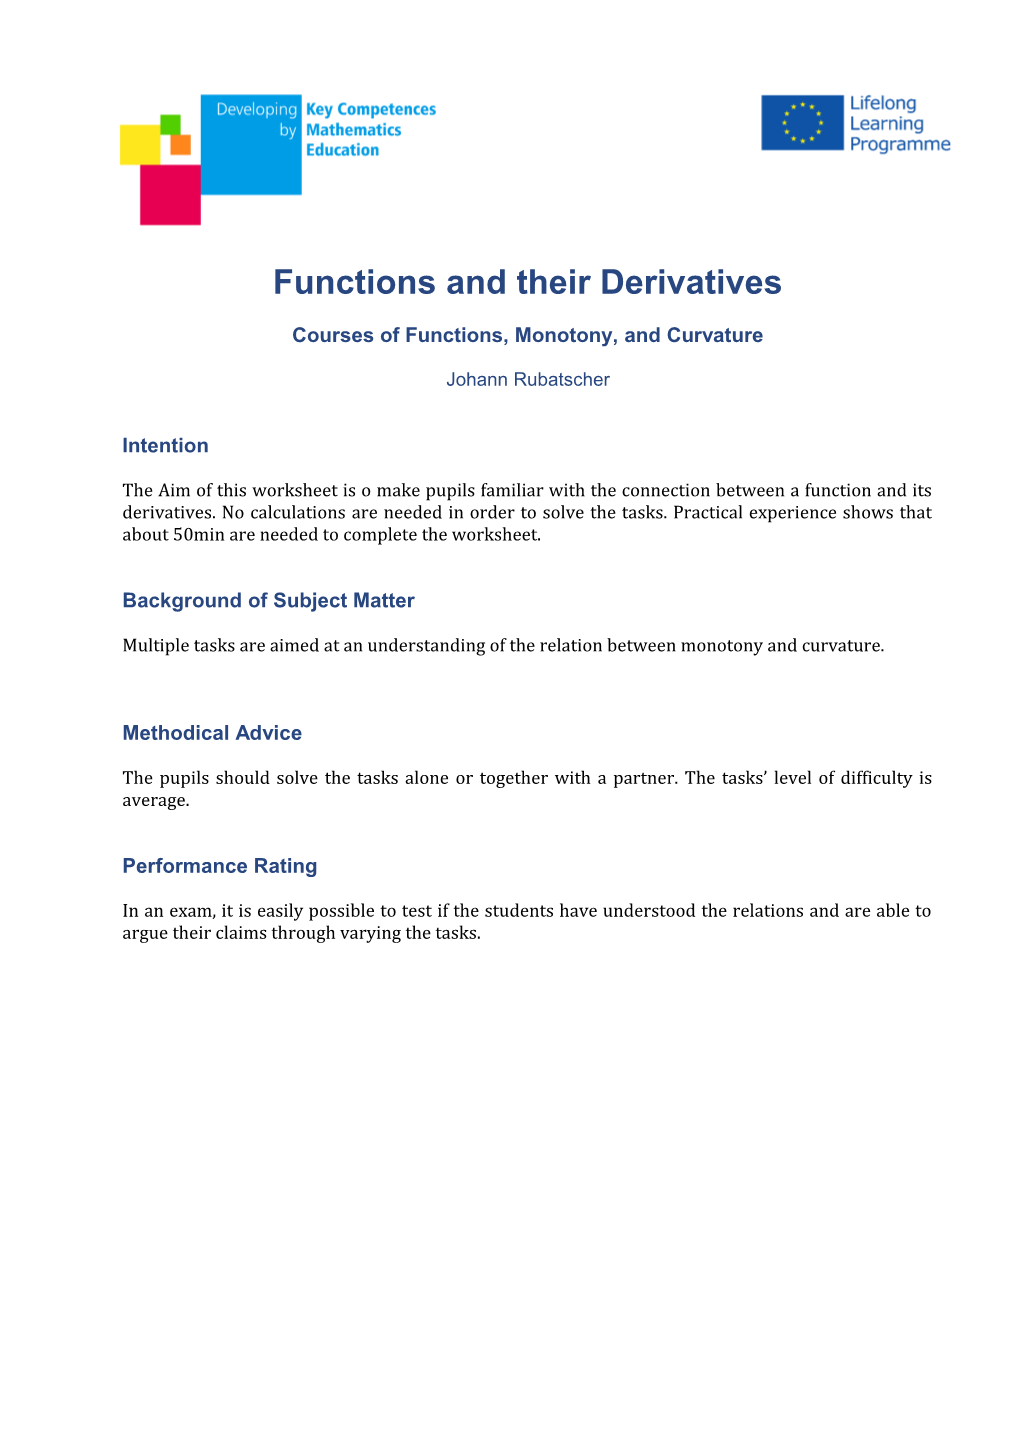 Functions and Their Derivatives